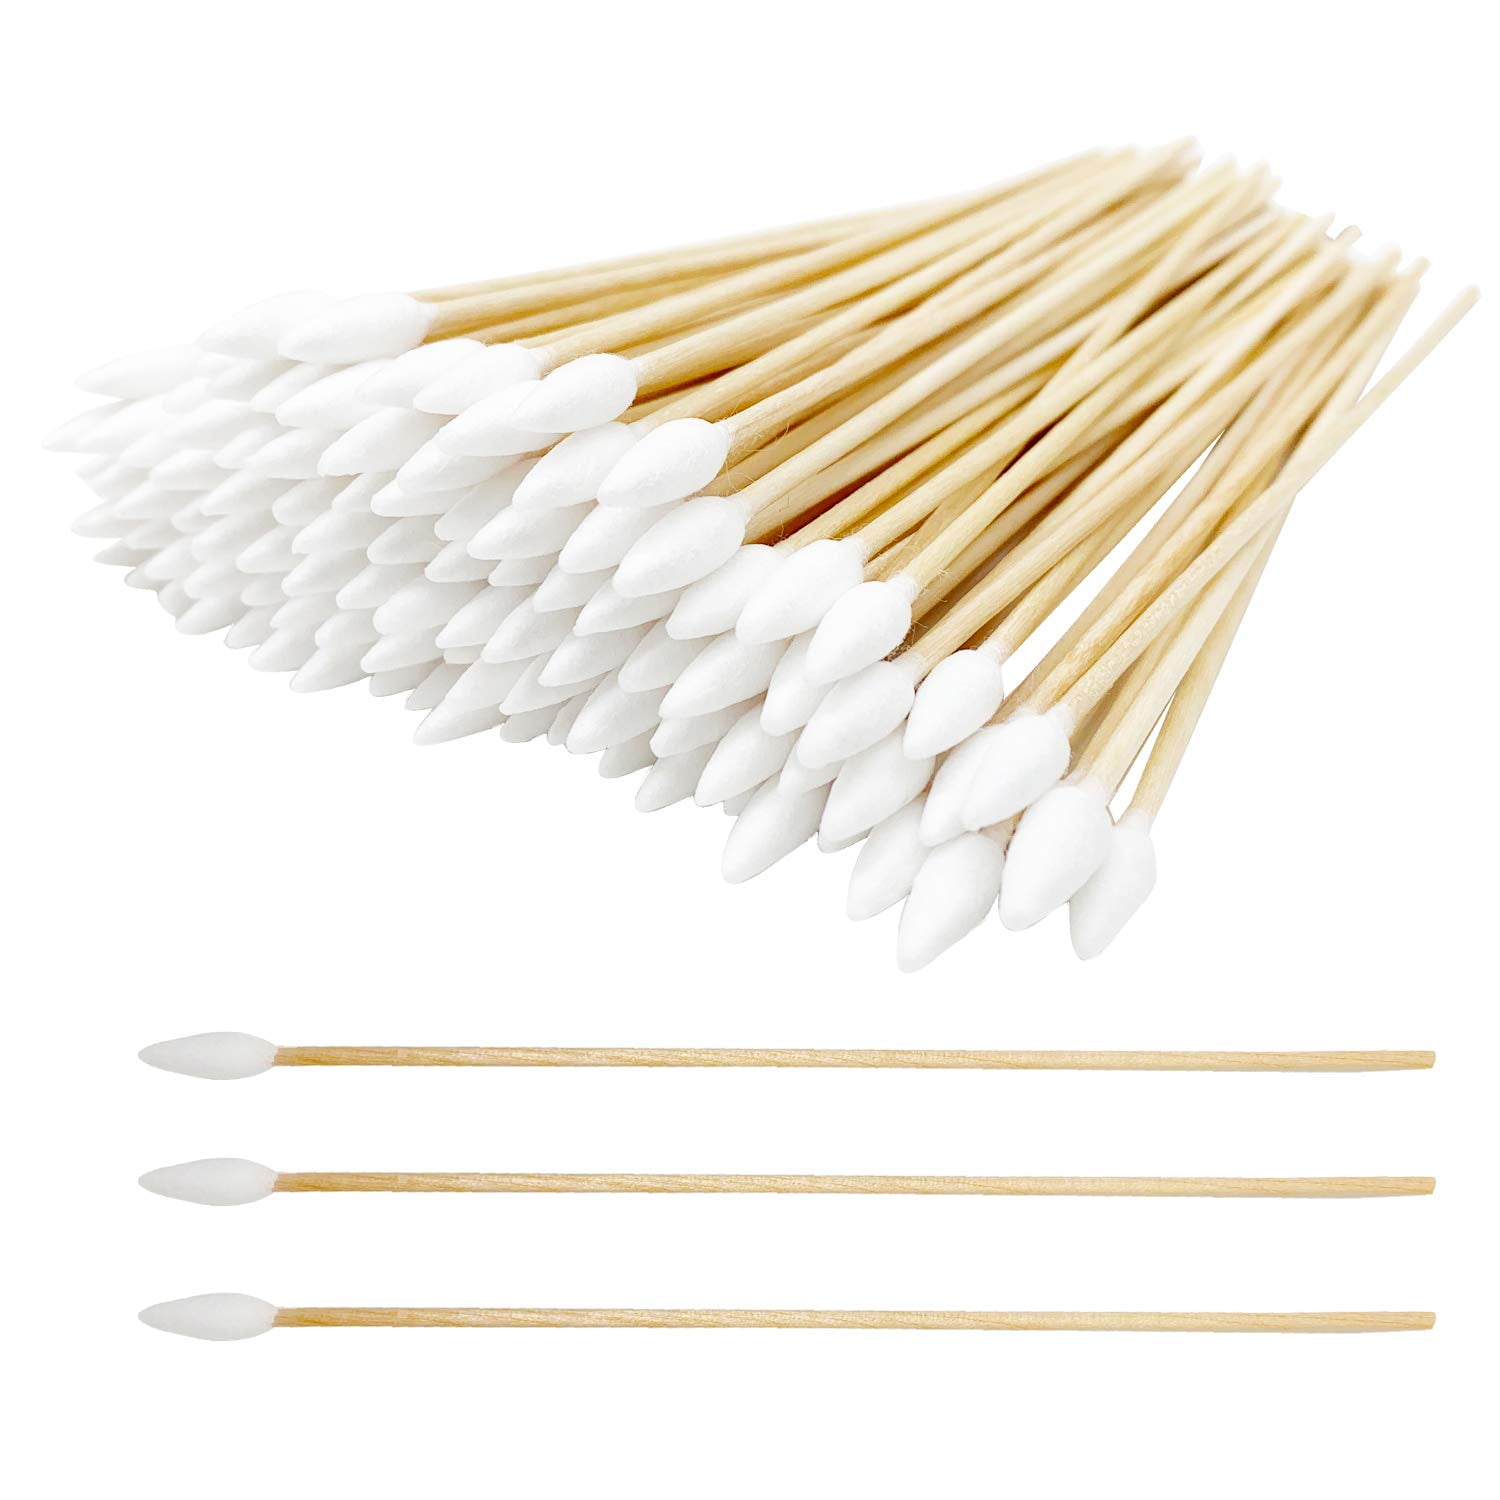 200pc Cotton Swabs Swab Q-tips 6" Long Wood Wooden Handle Cleaning Applicators 